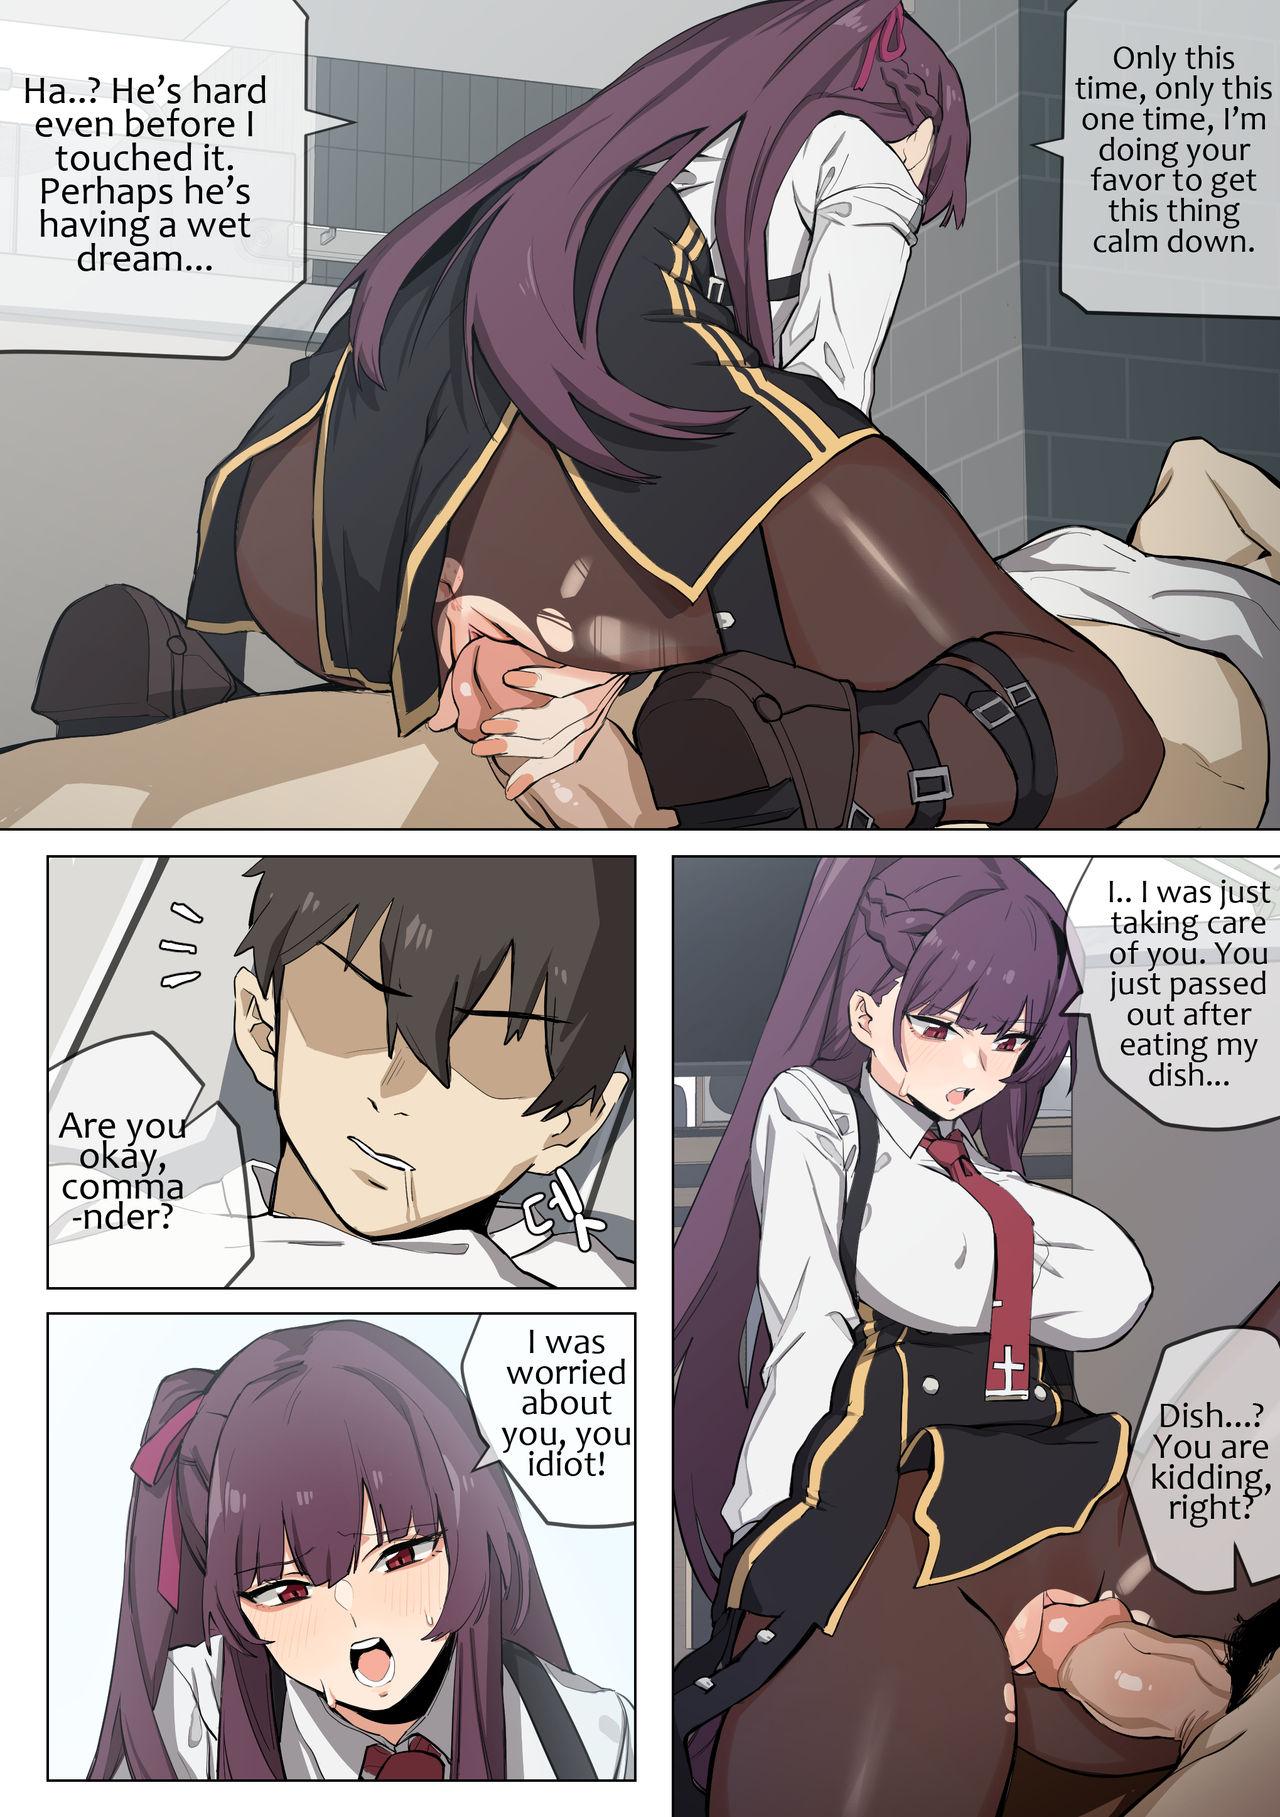 Shower WA2000 - Girls frontline Gaygroup - Page 4